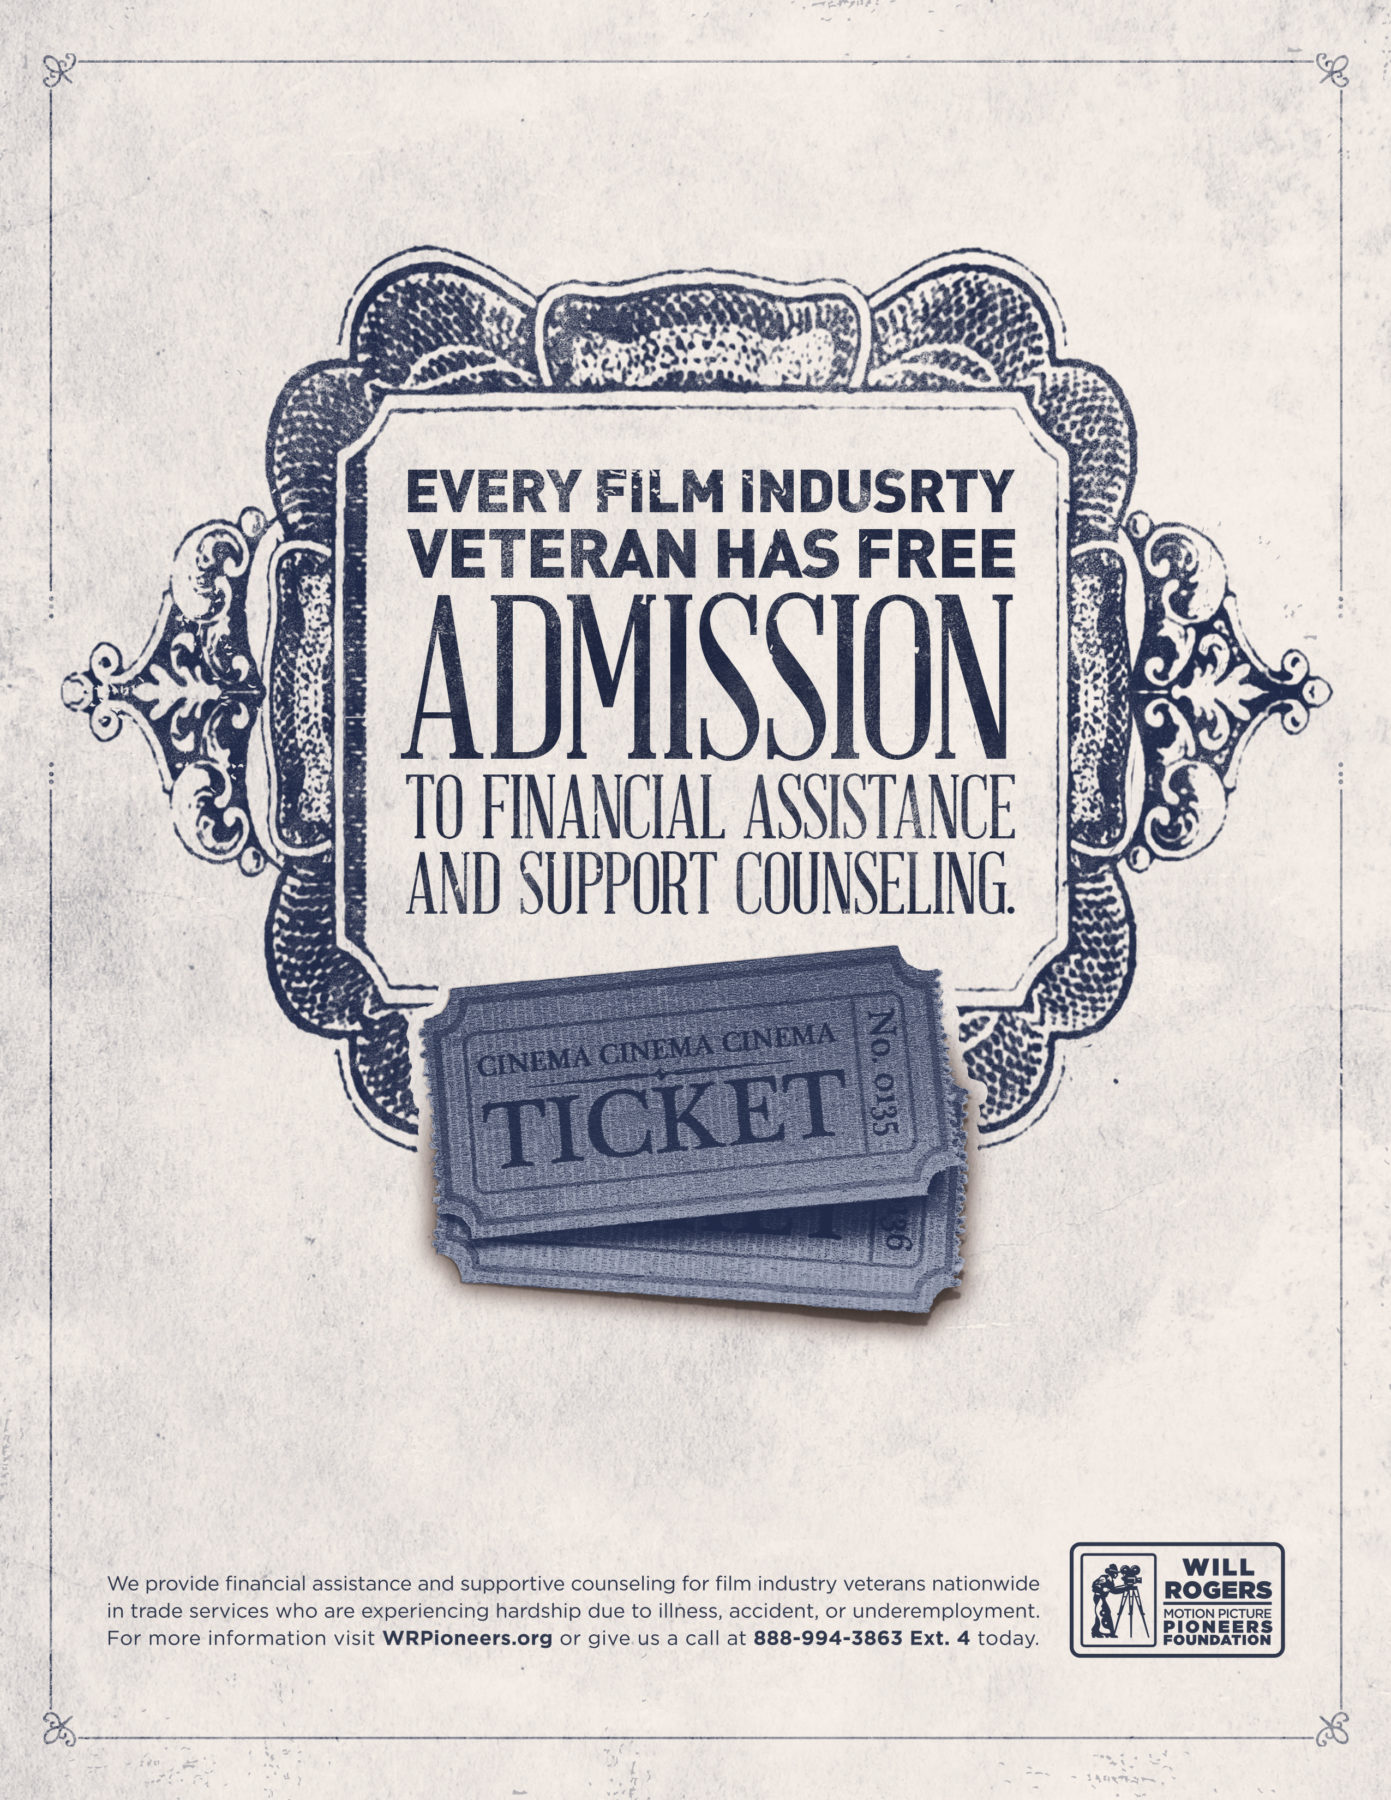 Print ad with distressed background, image of tickets, and headline "Every film industry veteran has free admission to financial assistance and support counseling."